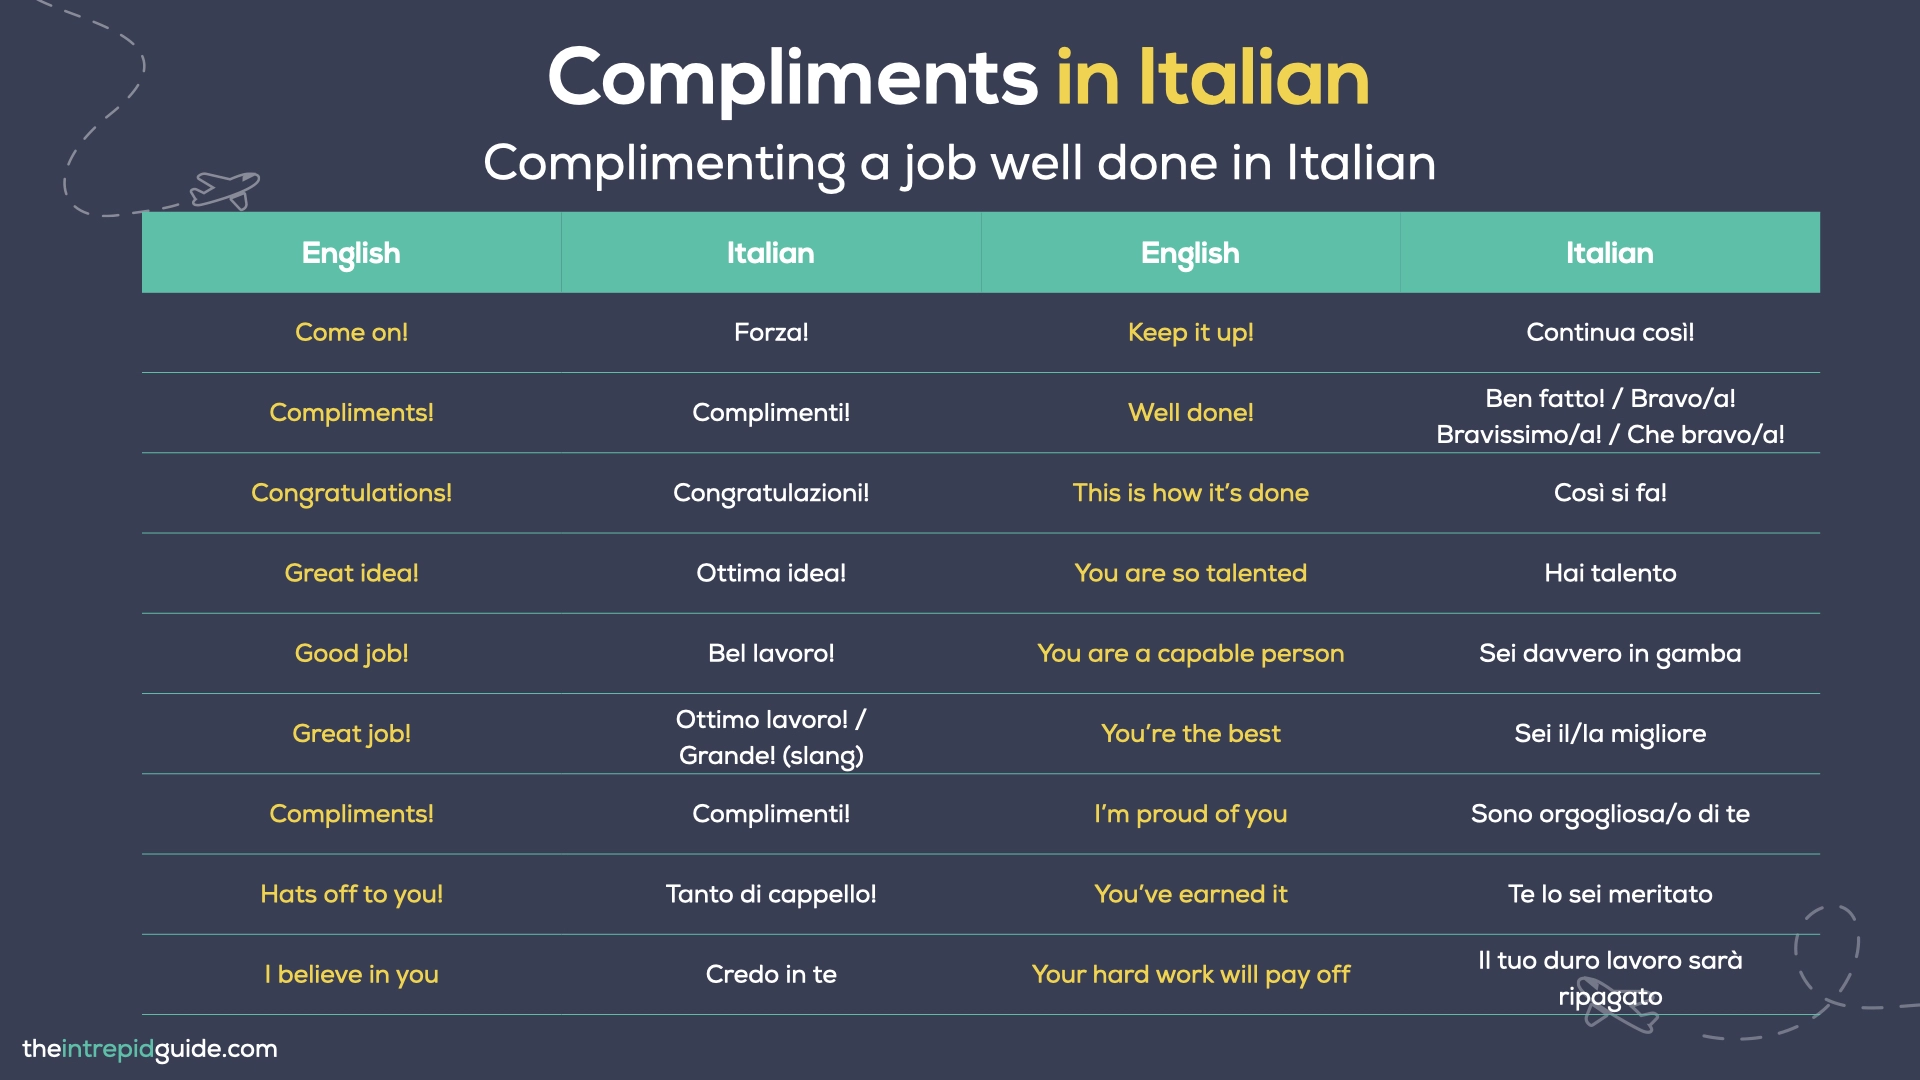 Compliments in Italian - Complimenting a job well done in Italian